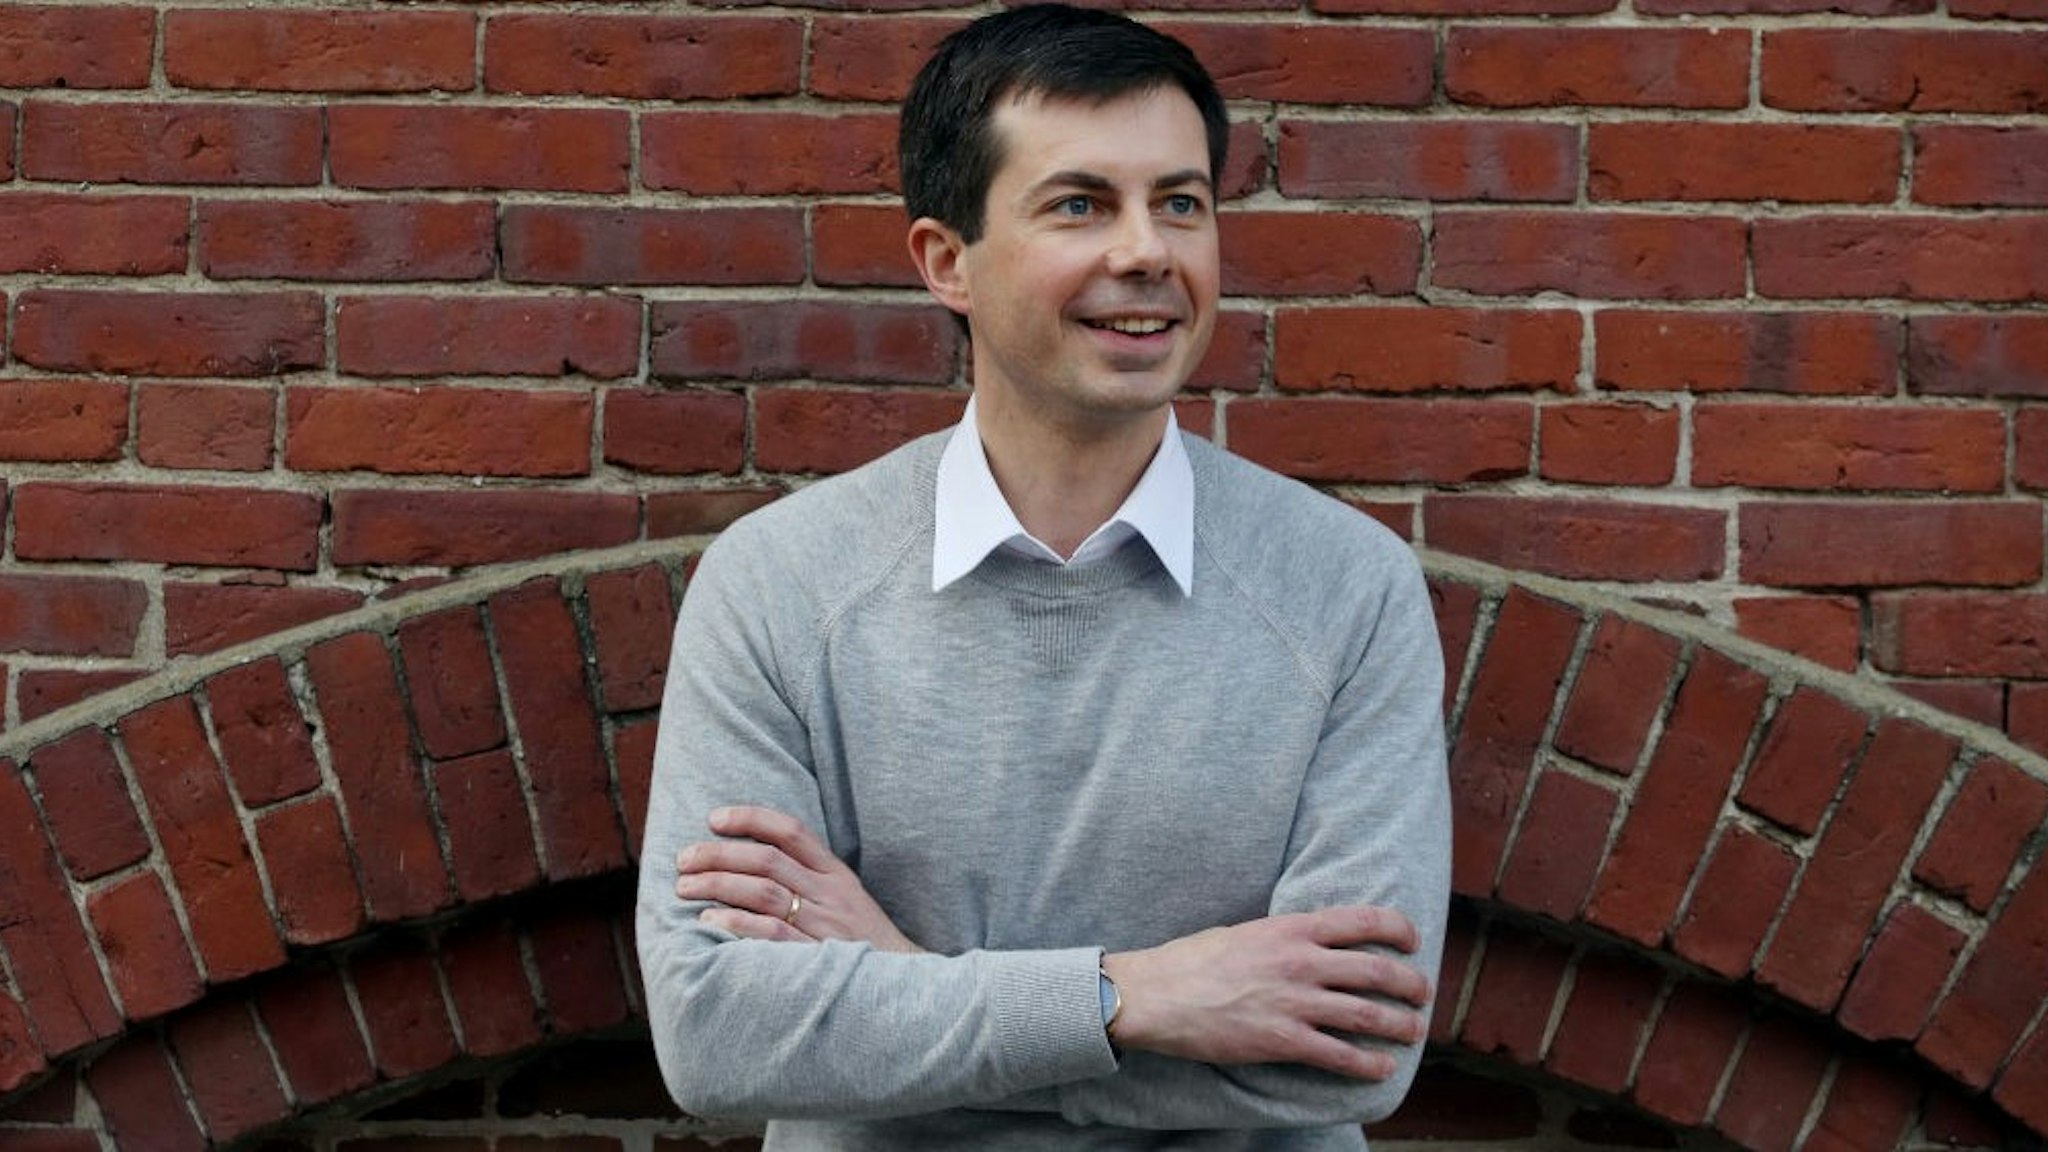 Pete Buttigieg, mayor of South Bend, IN, stands for a portrait after speaking at Gibson's Bookstore in Concord, NH on April 6, 2019. Buttigieg recently launched a presidential exploratory committee.